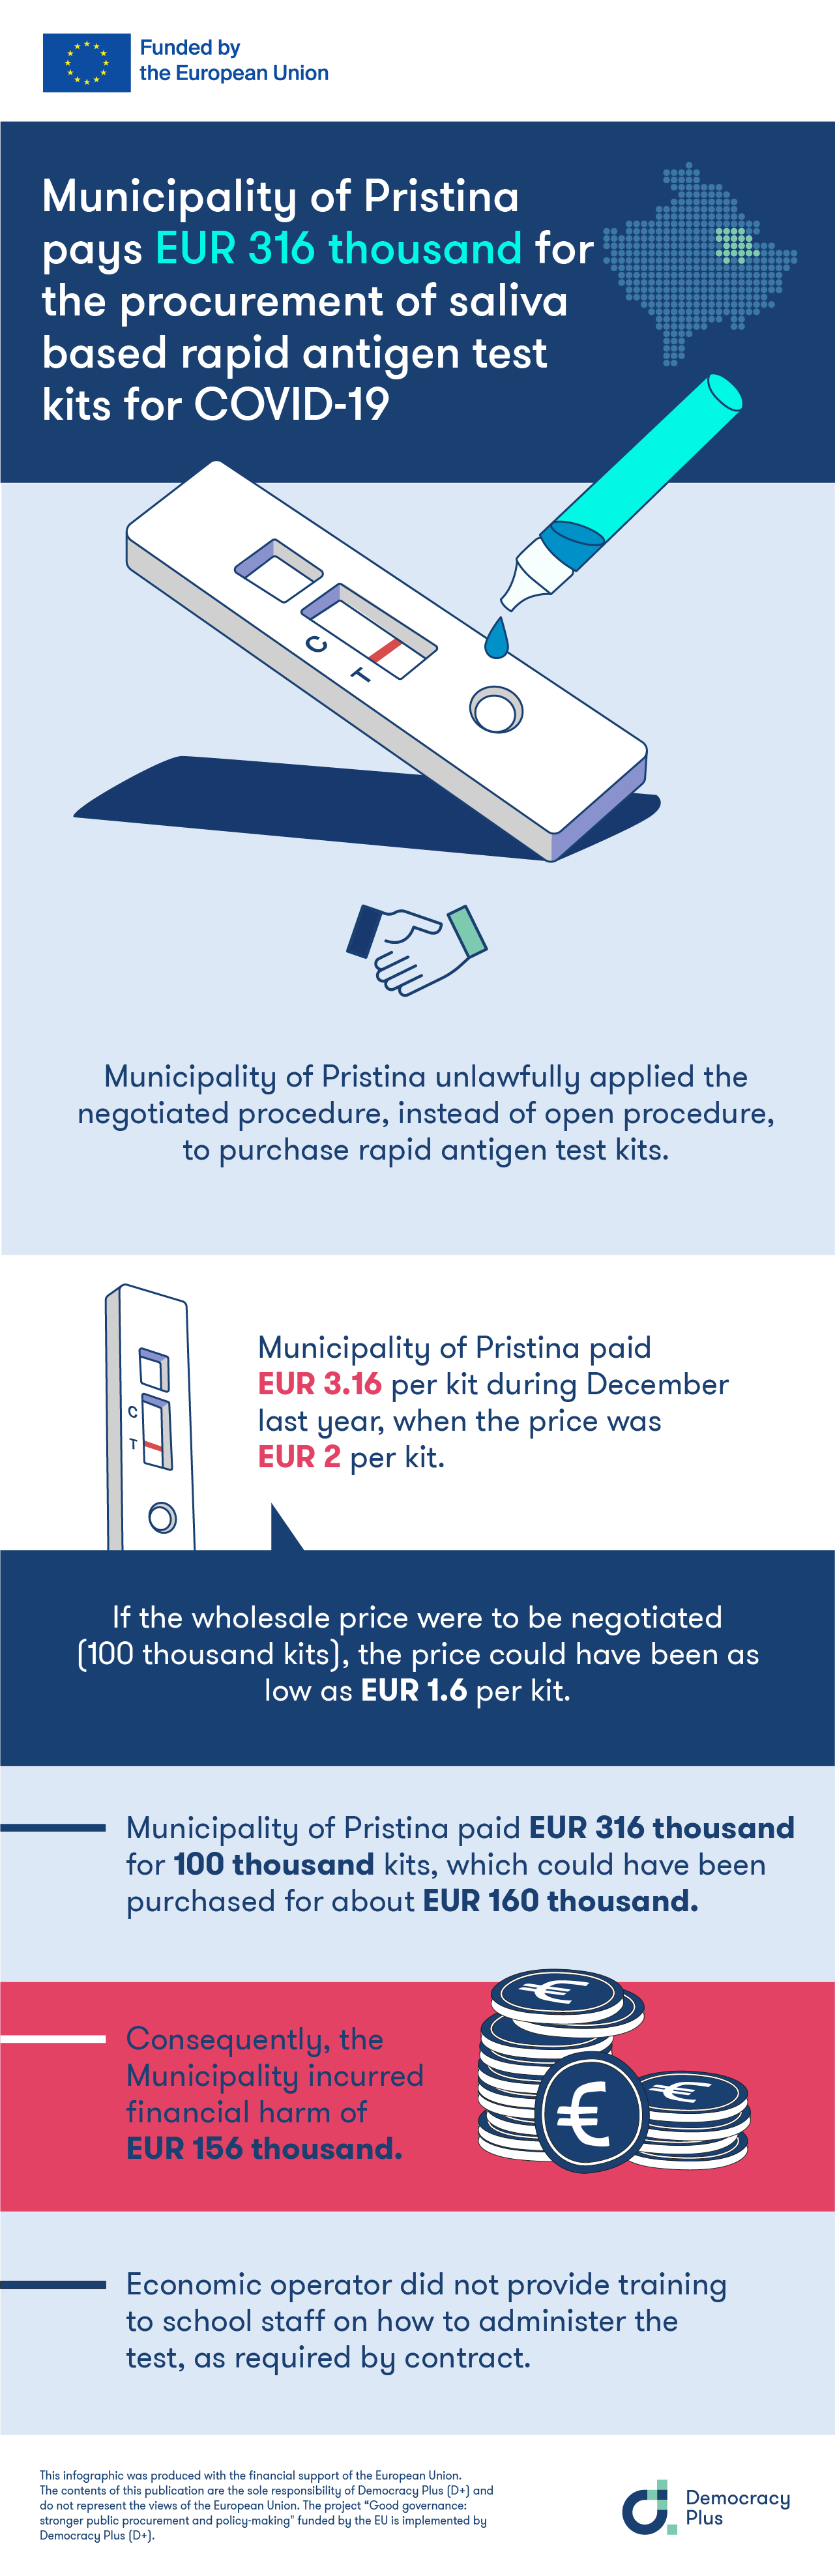 Municipality of Prishtina pays EUR 316 thousand for the procurement of saliva based rapid antigen test kits for COVID-19